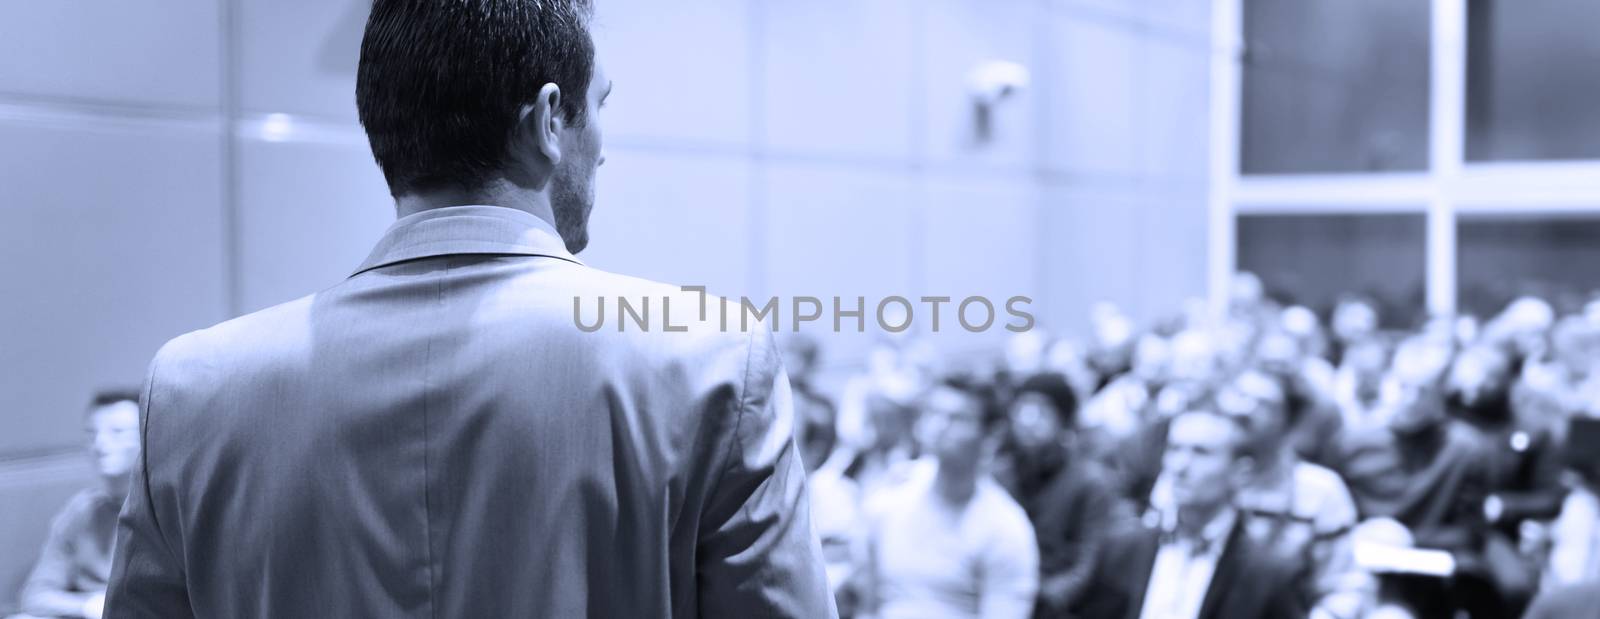 Speaker at Business Conference with Public Presentations. Audience at the conference hall. Business and Entrepreneurship concept. Background blur. Shallow depth of field. Blue toned.